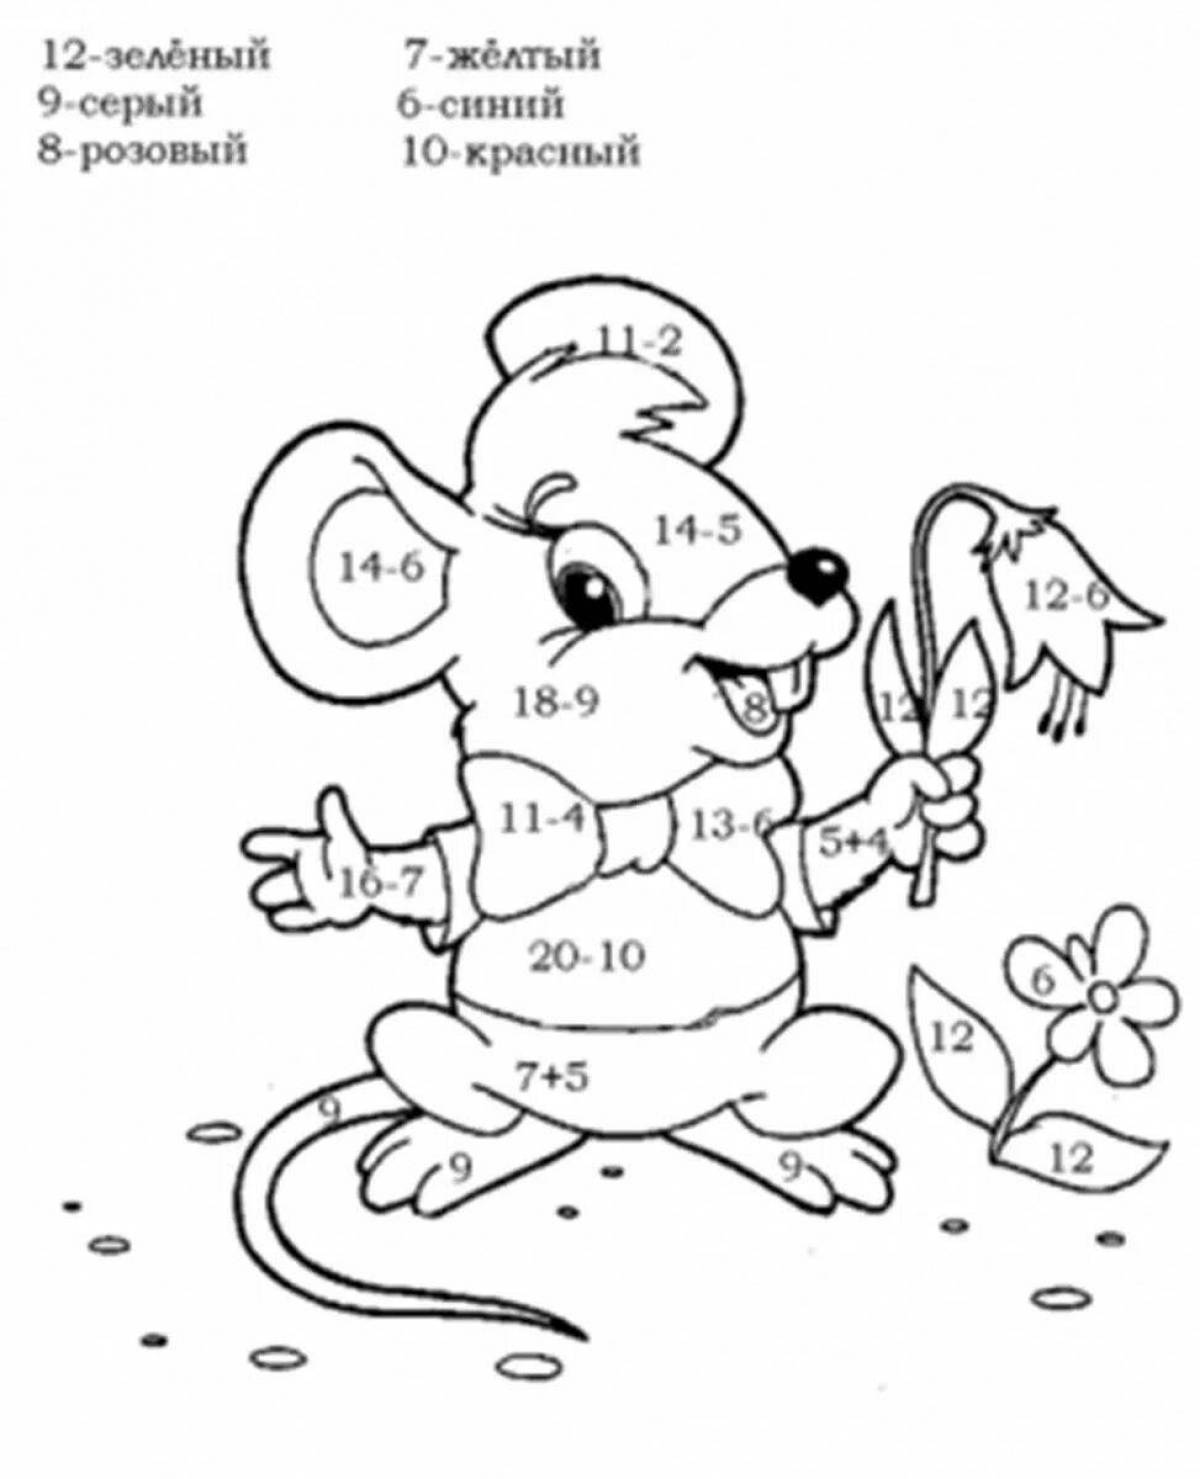 Bright coloring page 2nd grade